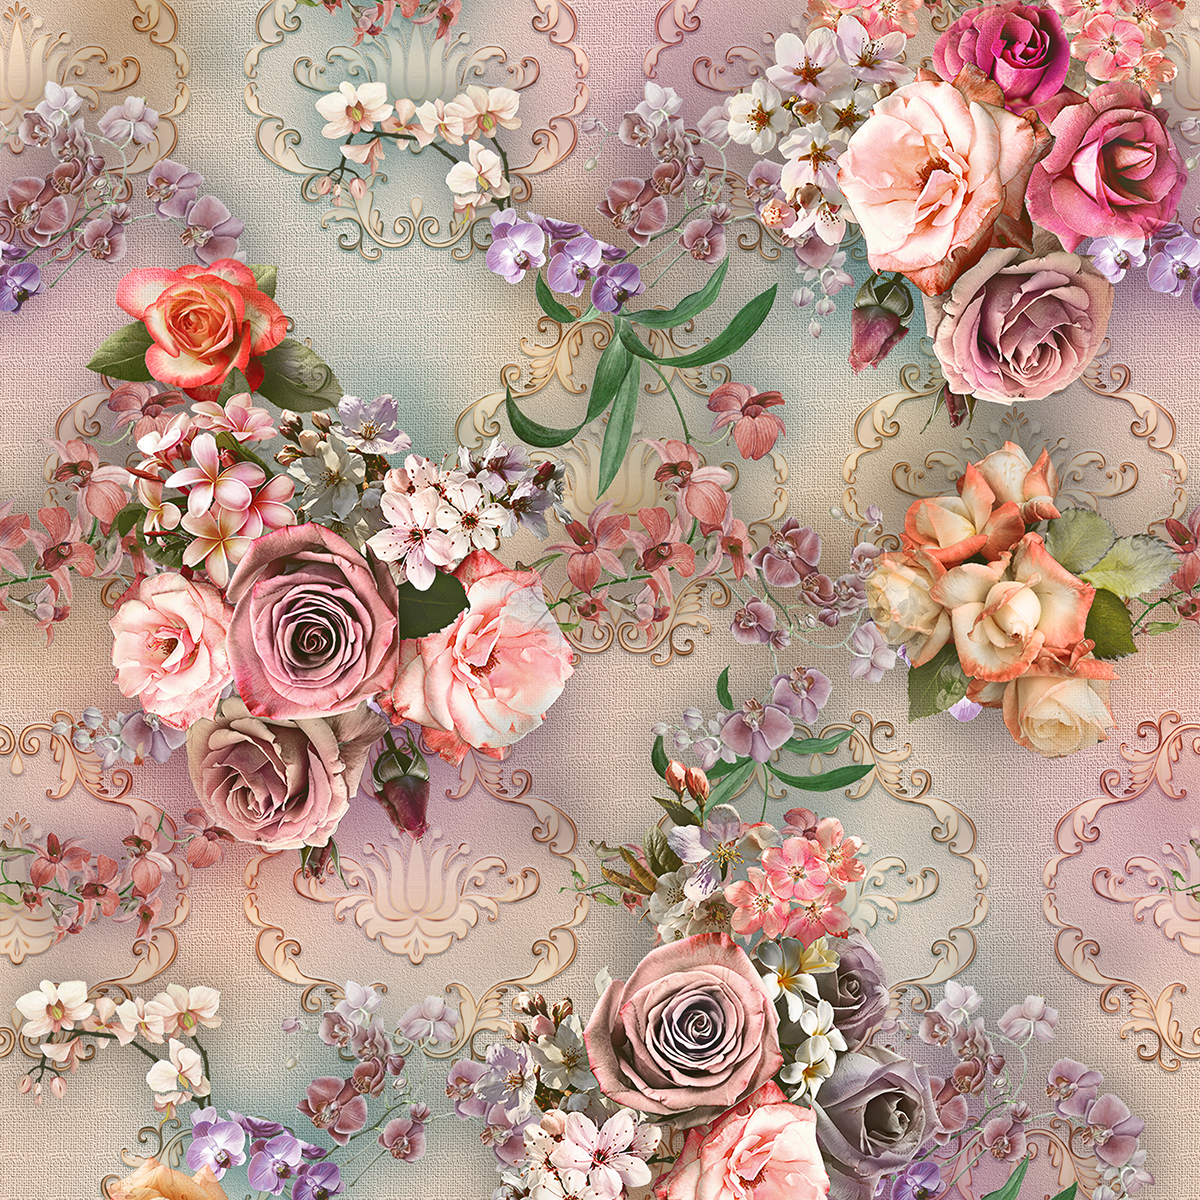 A floral pattern with flowers